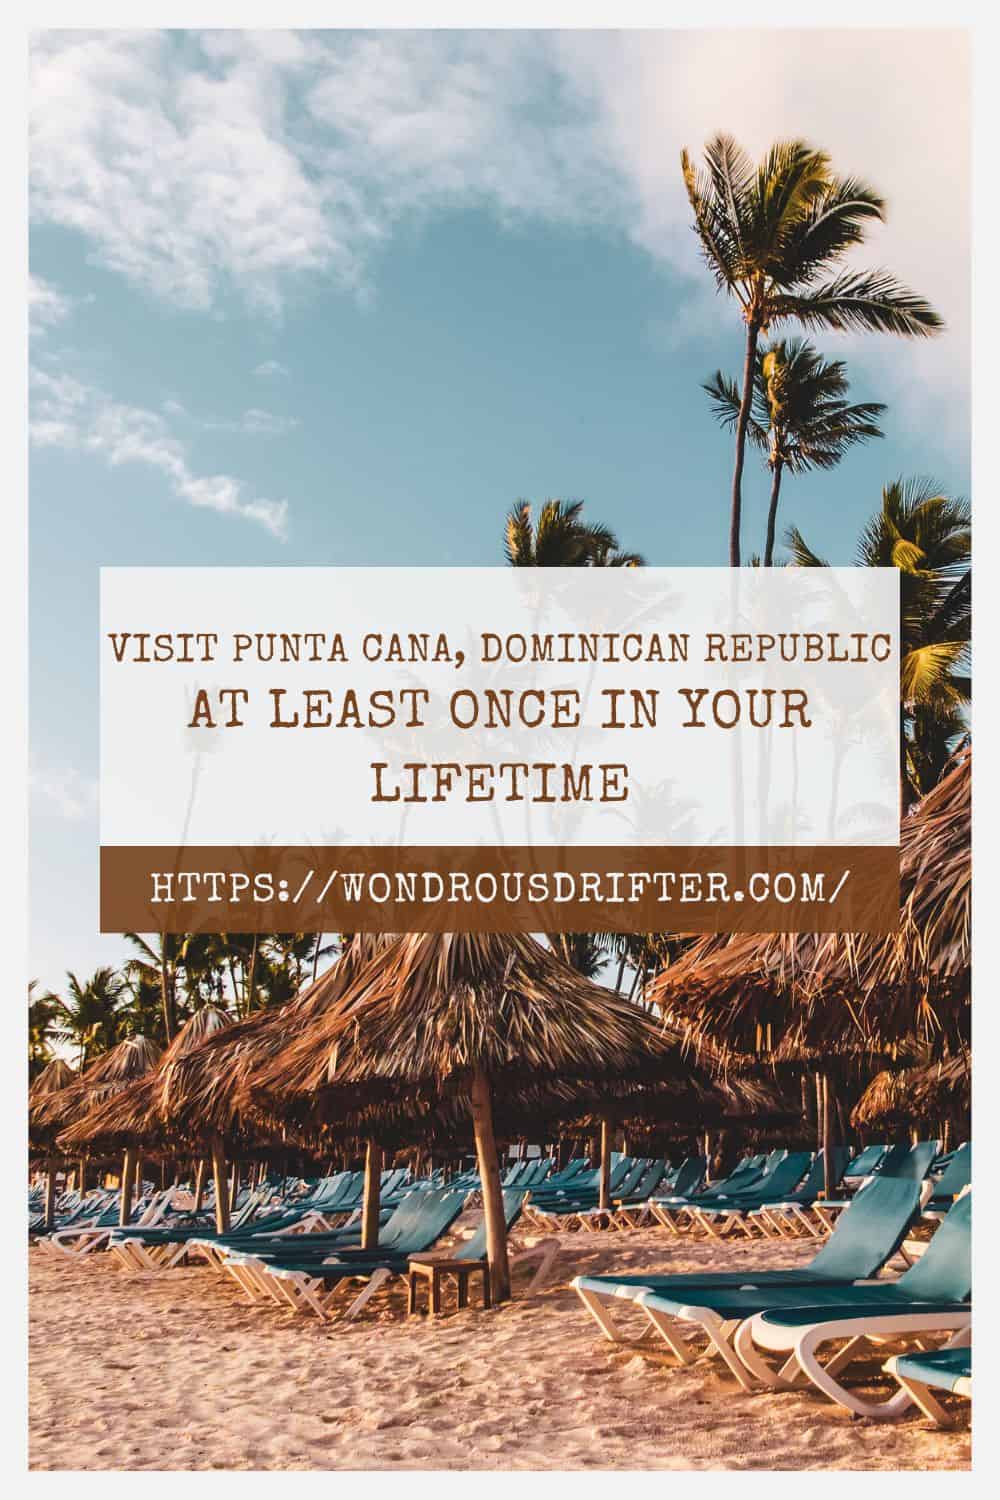 Visit Punta Cana Dominican Republic at least once in your lifetime